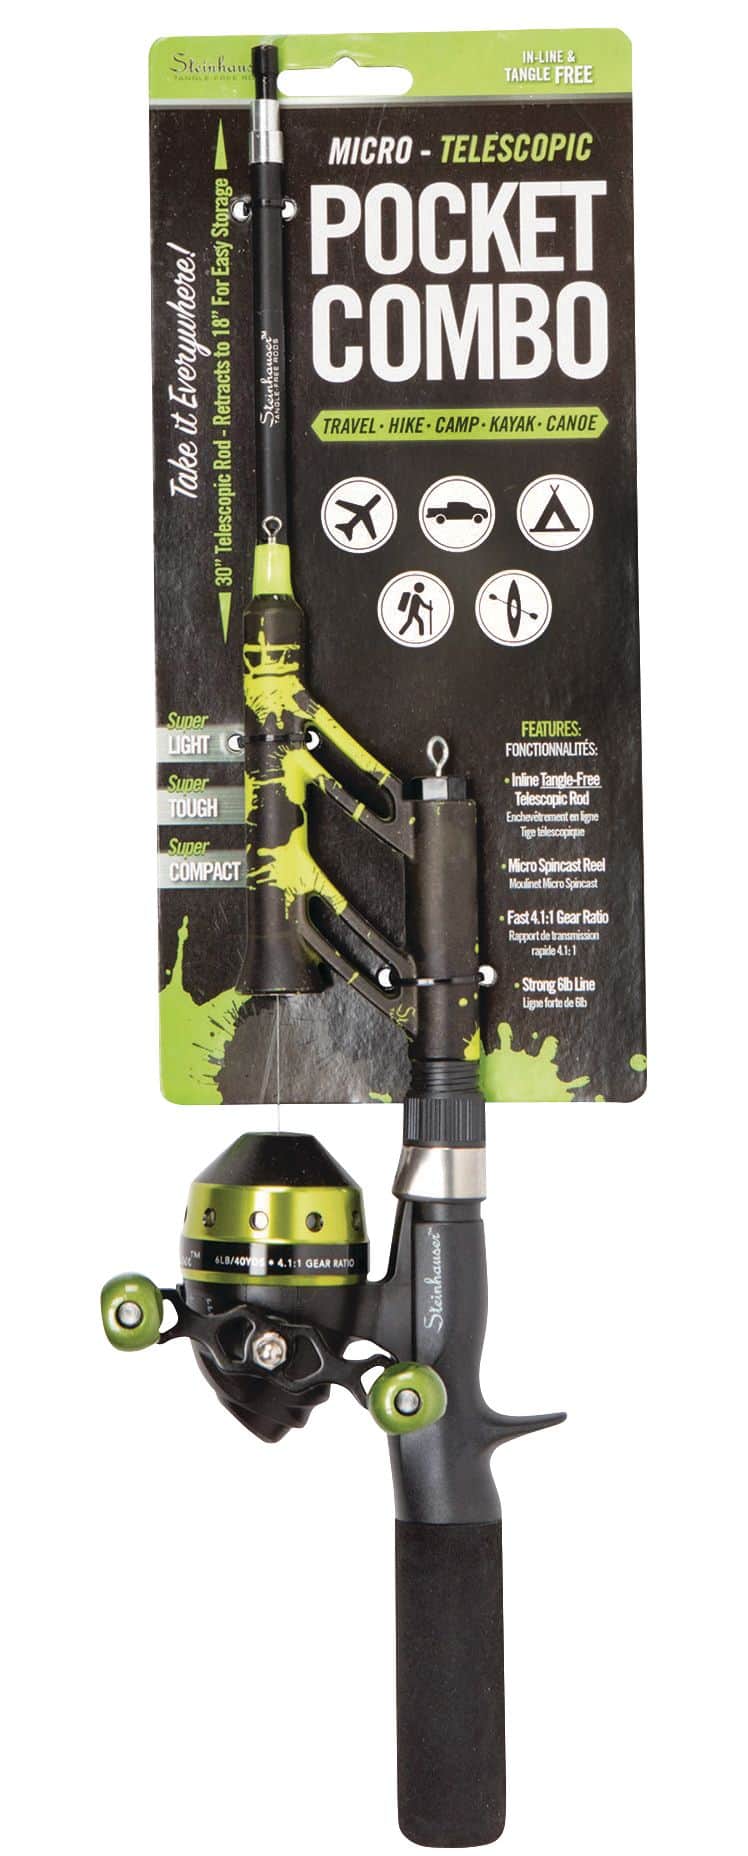 https://media-www.canadiantire.ca/product/playing/fishing/fishing-equipment/1783719/steinhausser-tangle-free-30-pocket-combo-green-2d28f4d1-ea8e-4a9f-8840-9238a0533eac-jpgrendition.jpg